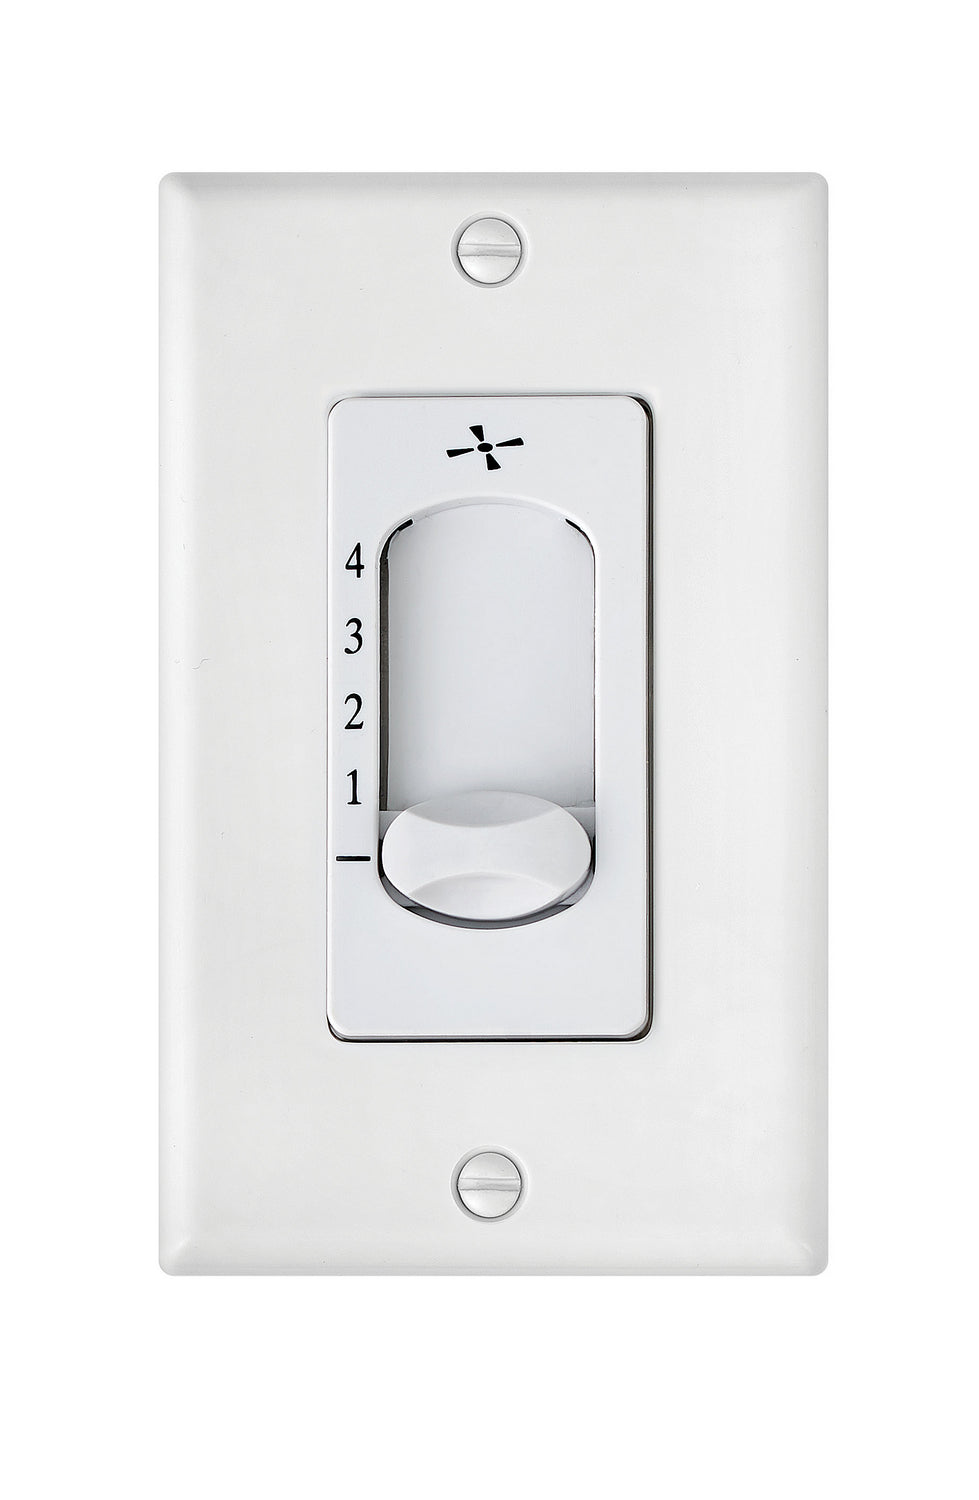 Hinkley Canada - Wall Contol - Wall Control 4 Speed Slide - White- Union Lighting Luminaires Decor